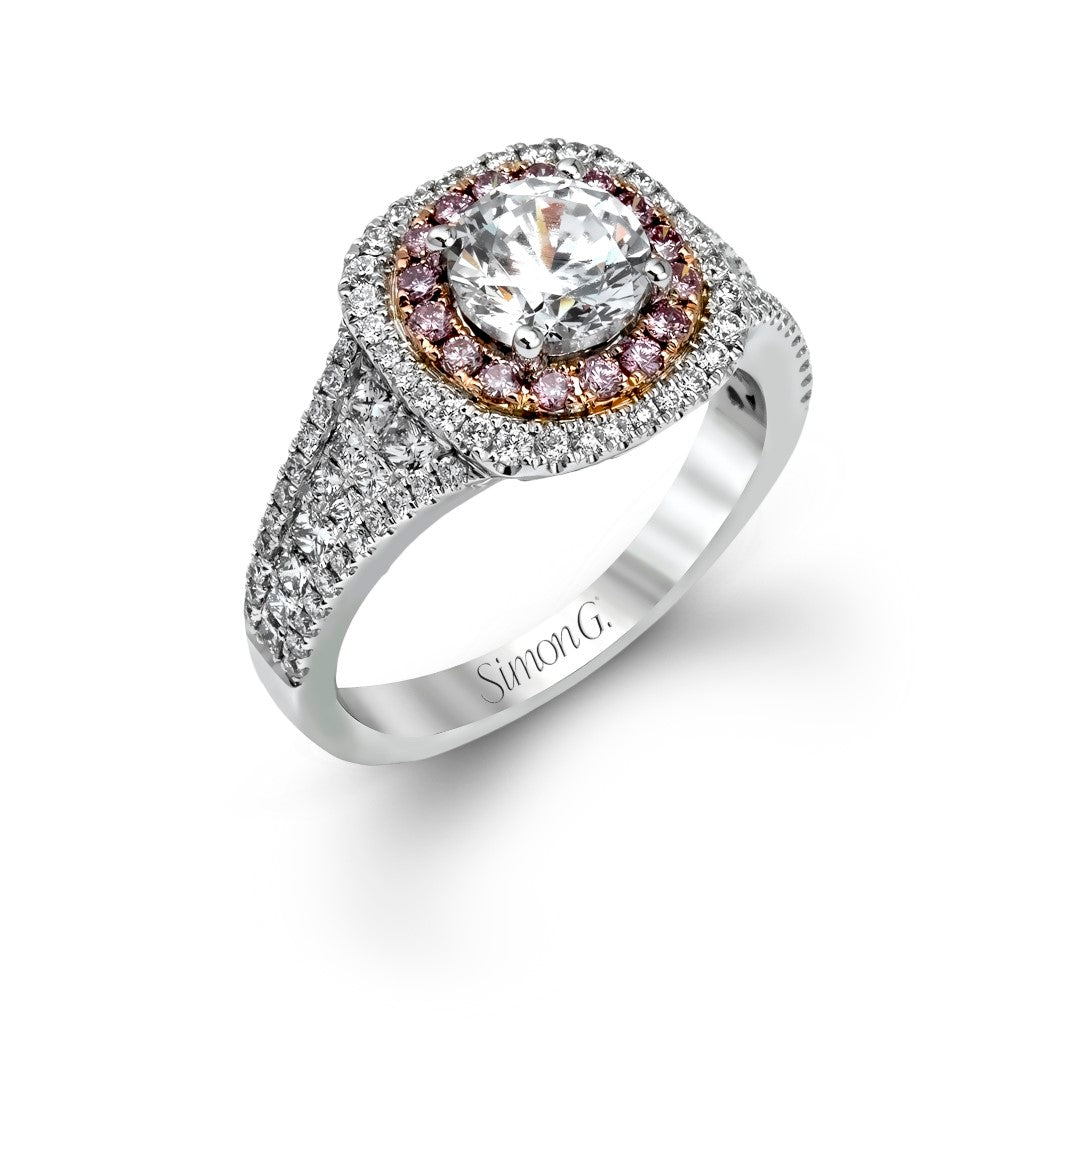 SIMON G. 18K WHITE AND ROSE GOLD 0.99CT DIAMOND (PINK DIAMONDS) MOUNTING CENTER DIAMOND SOLD SEPERATELY FROM THE BRIDAL COLLECTION